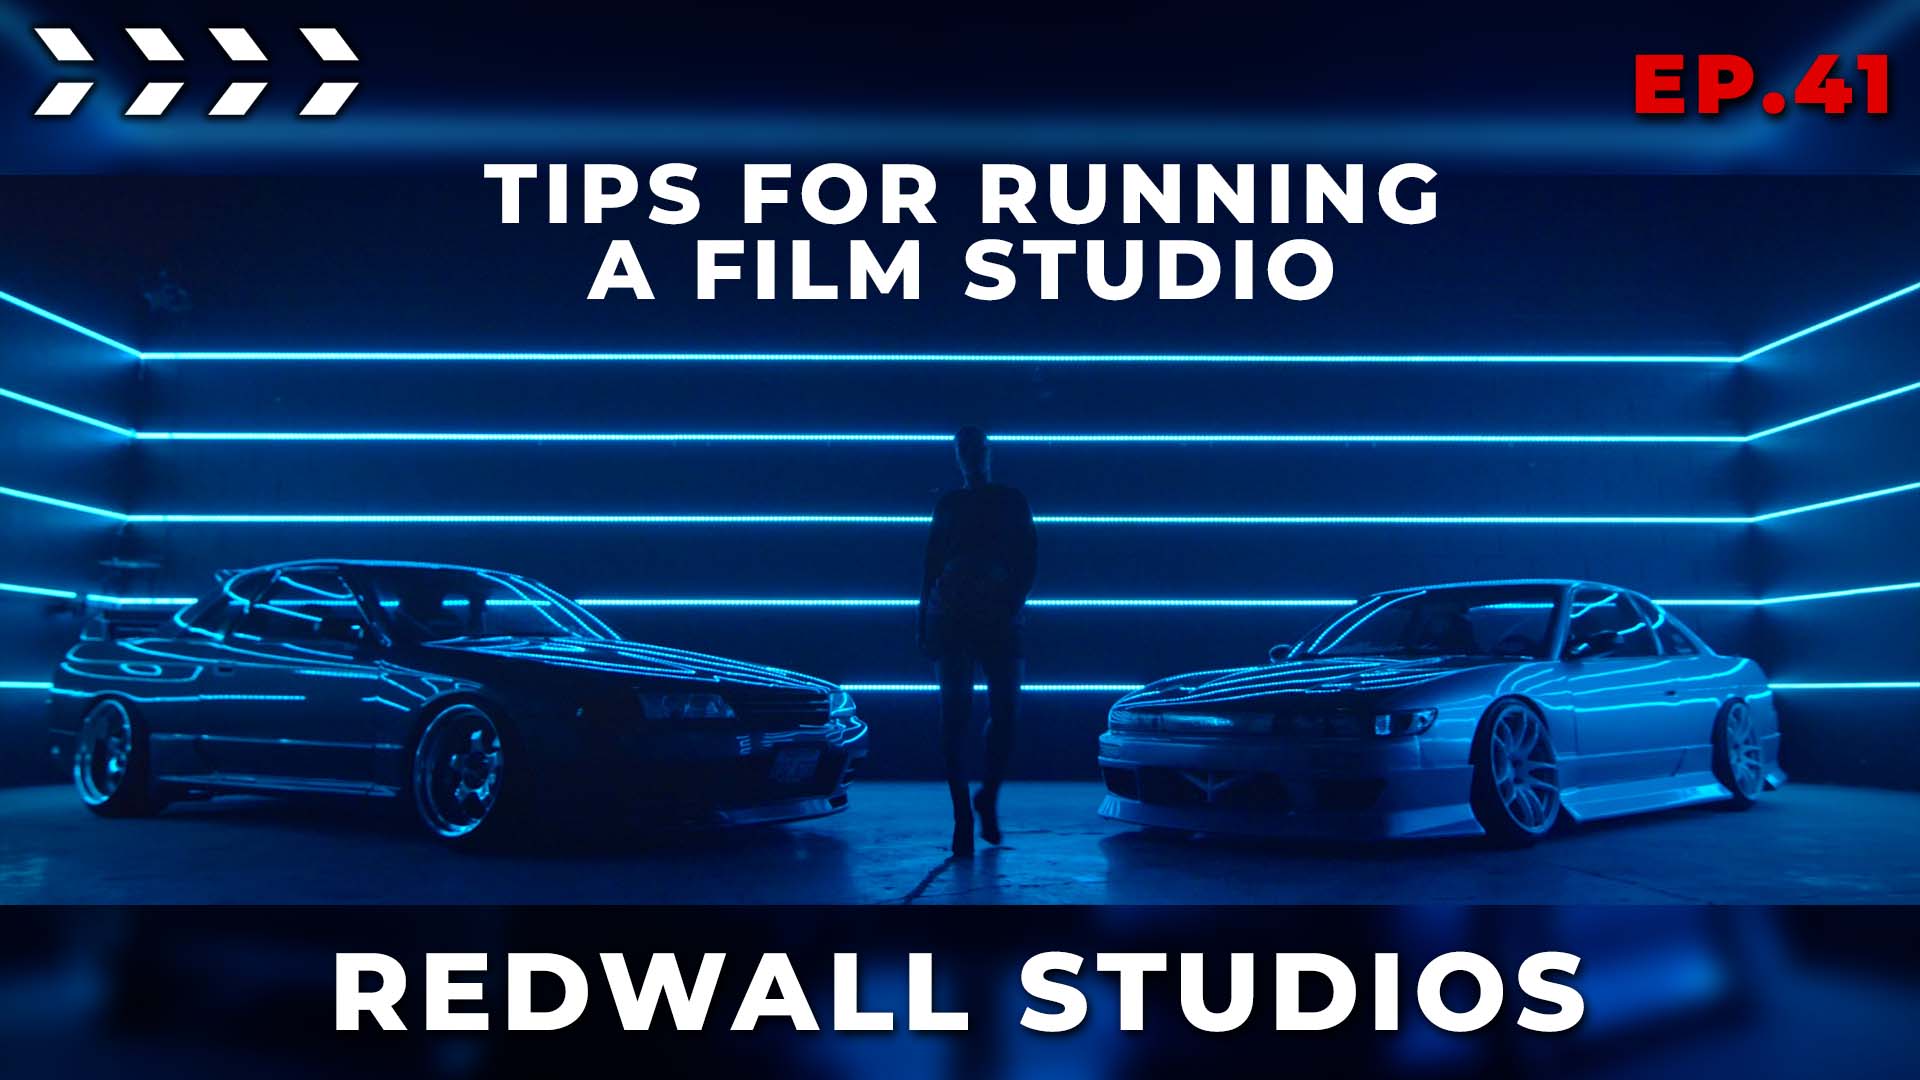 Tips for starting your own Film Studio, Interview with Redwall Studios | Ep.41